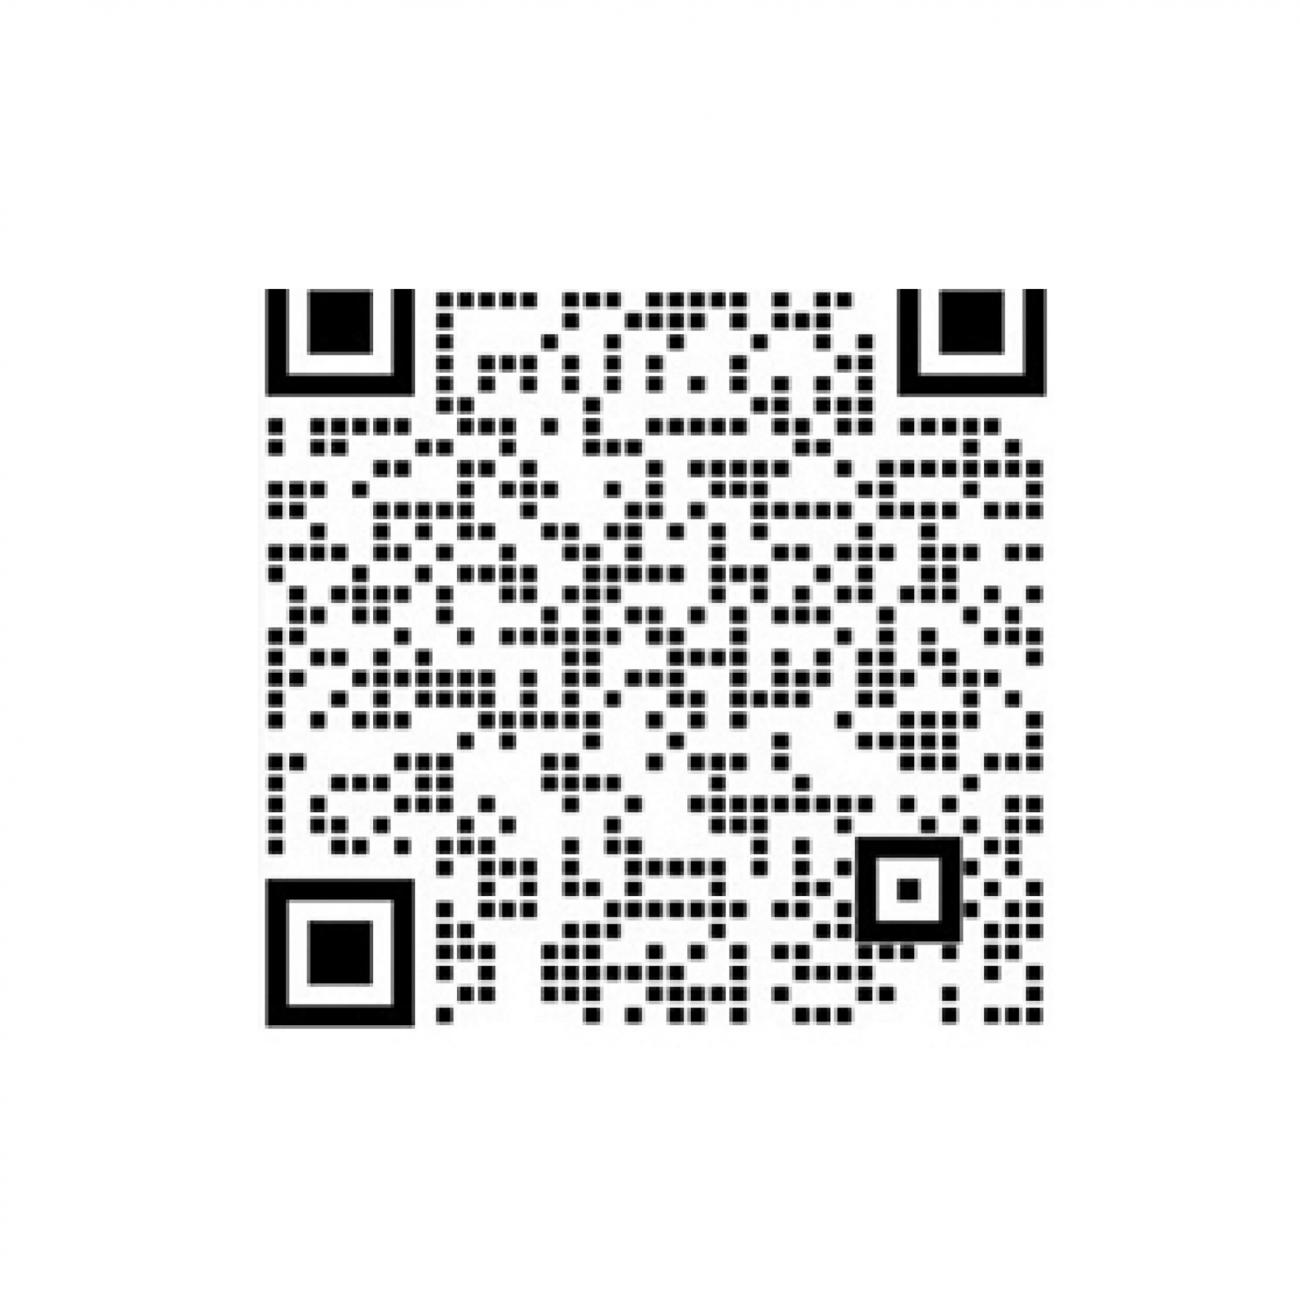 A QR code for scanning